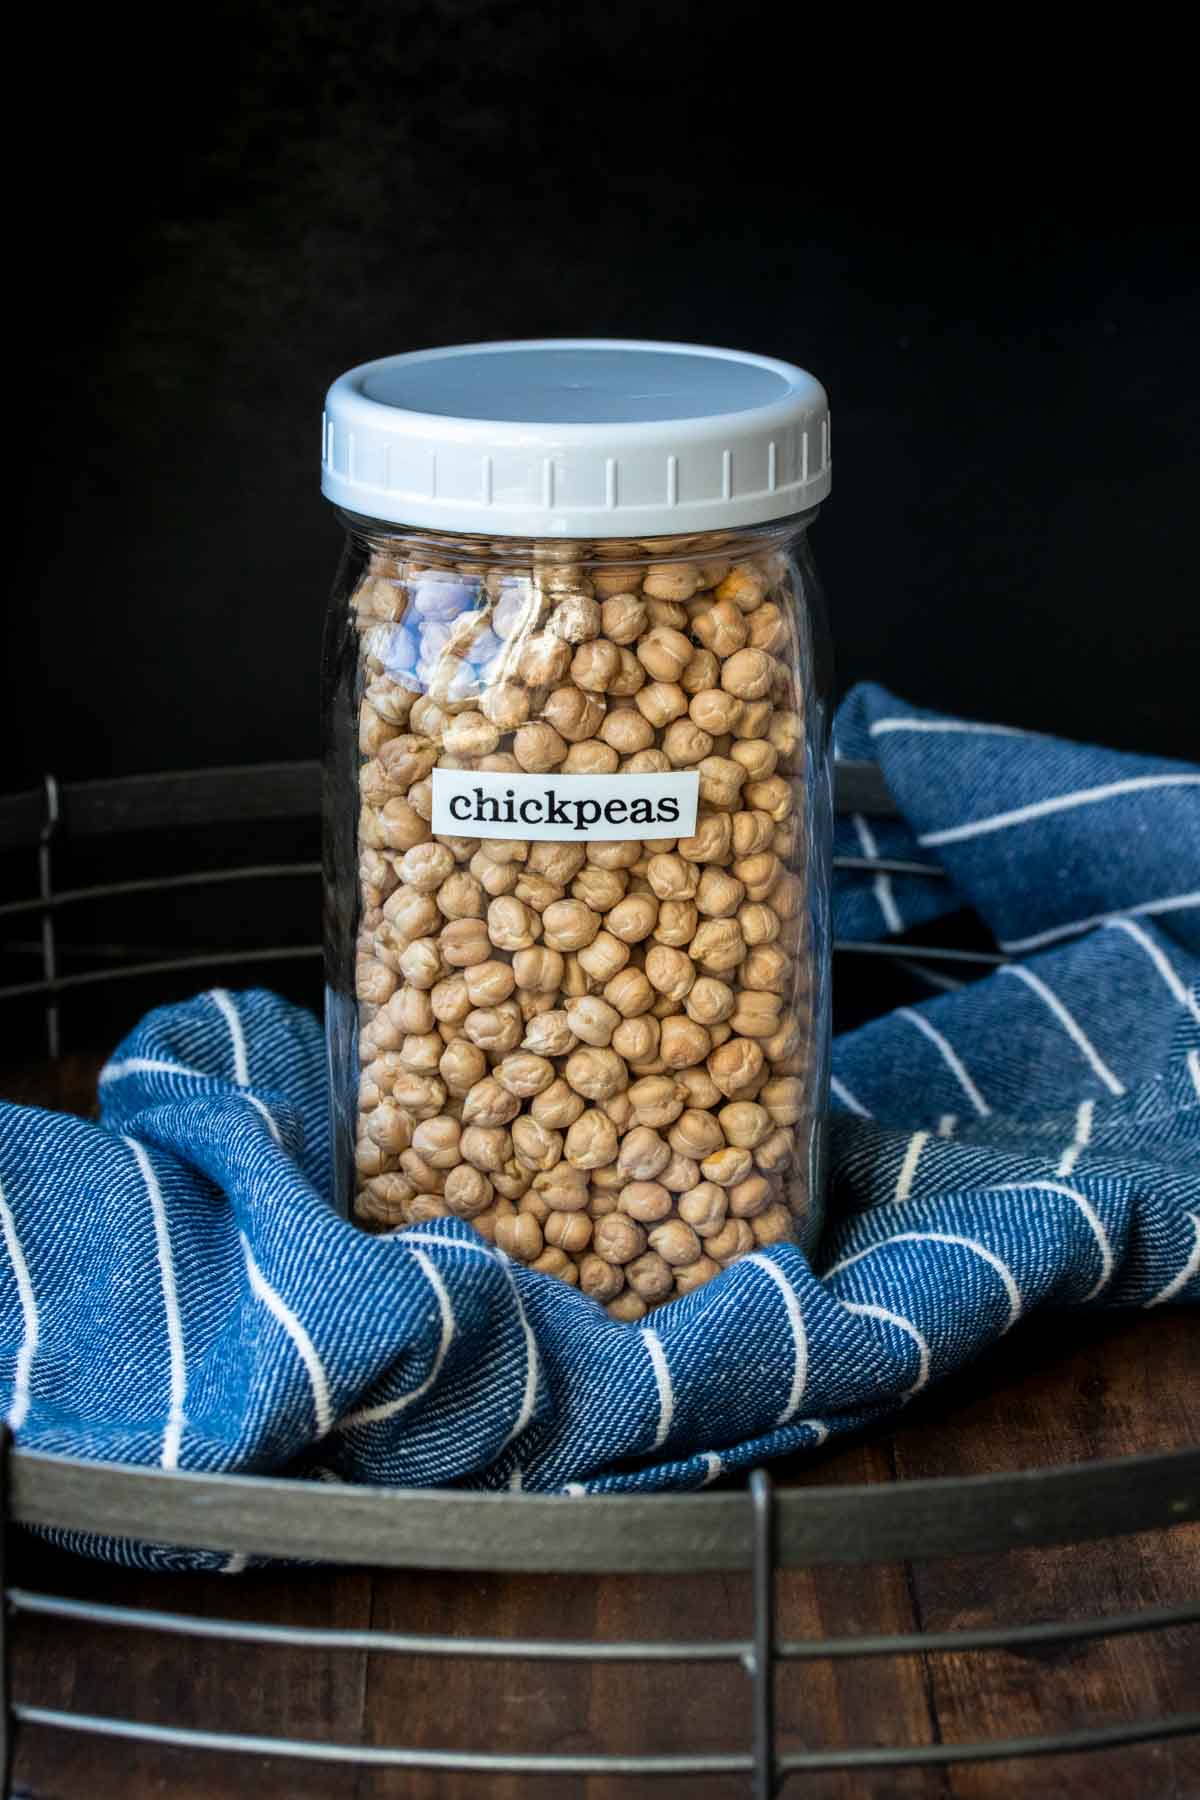 Glass jar with white plastic lid filled with dried chickpeas